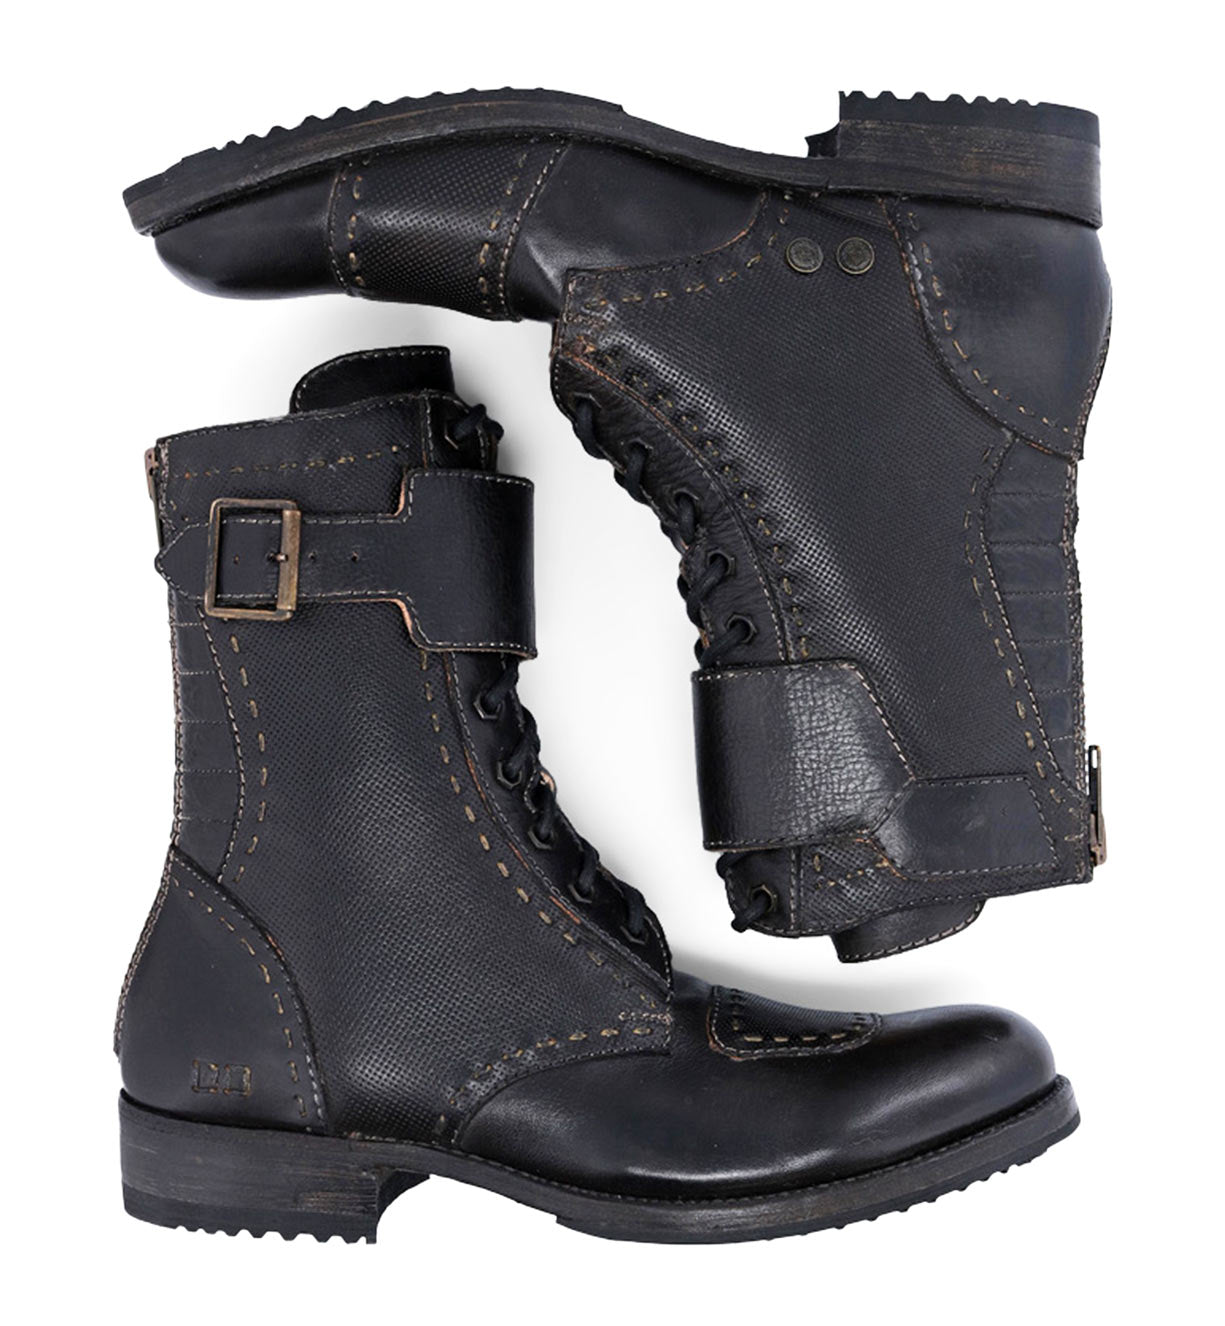 A pair of Bed Stu black leather boots with buckles.